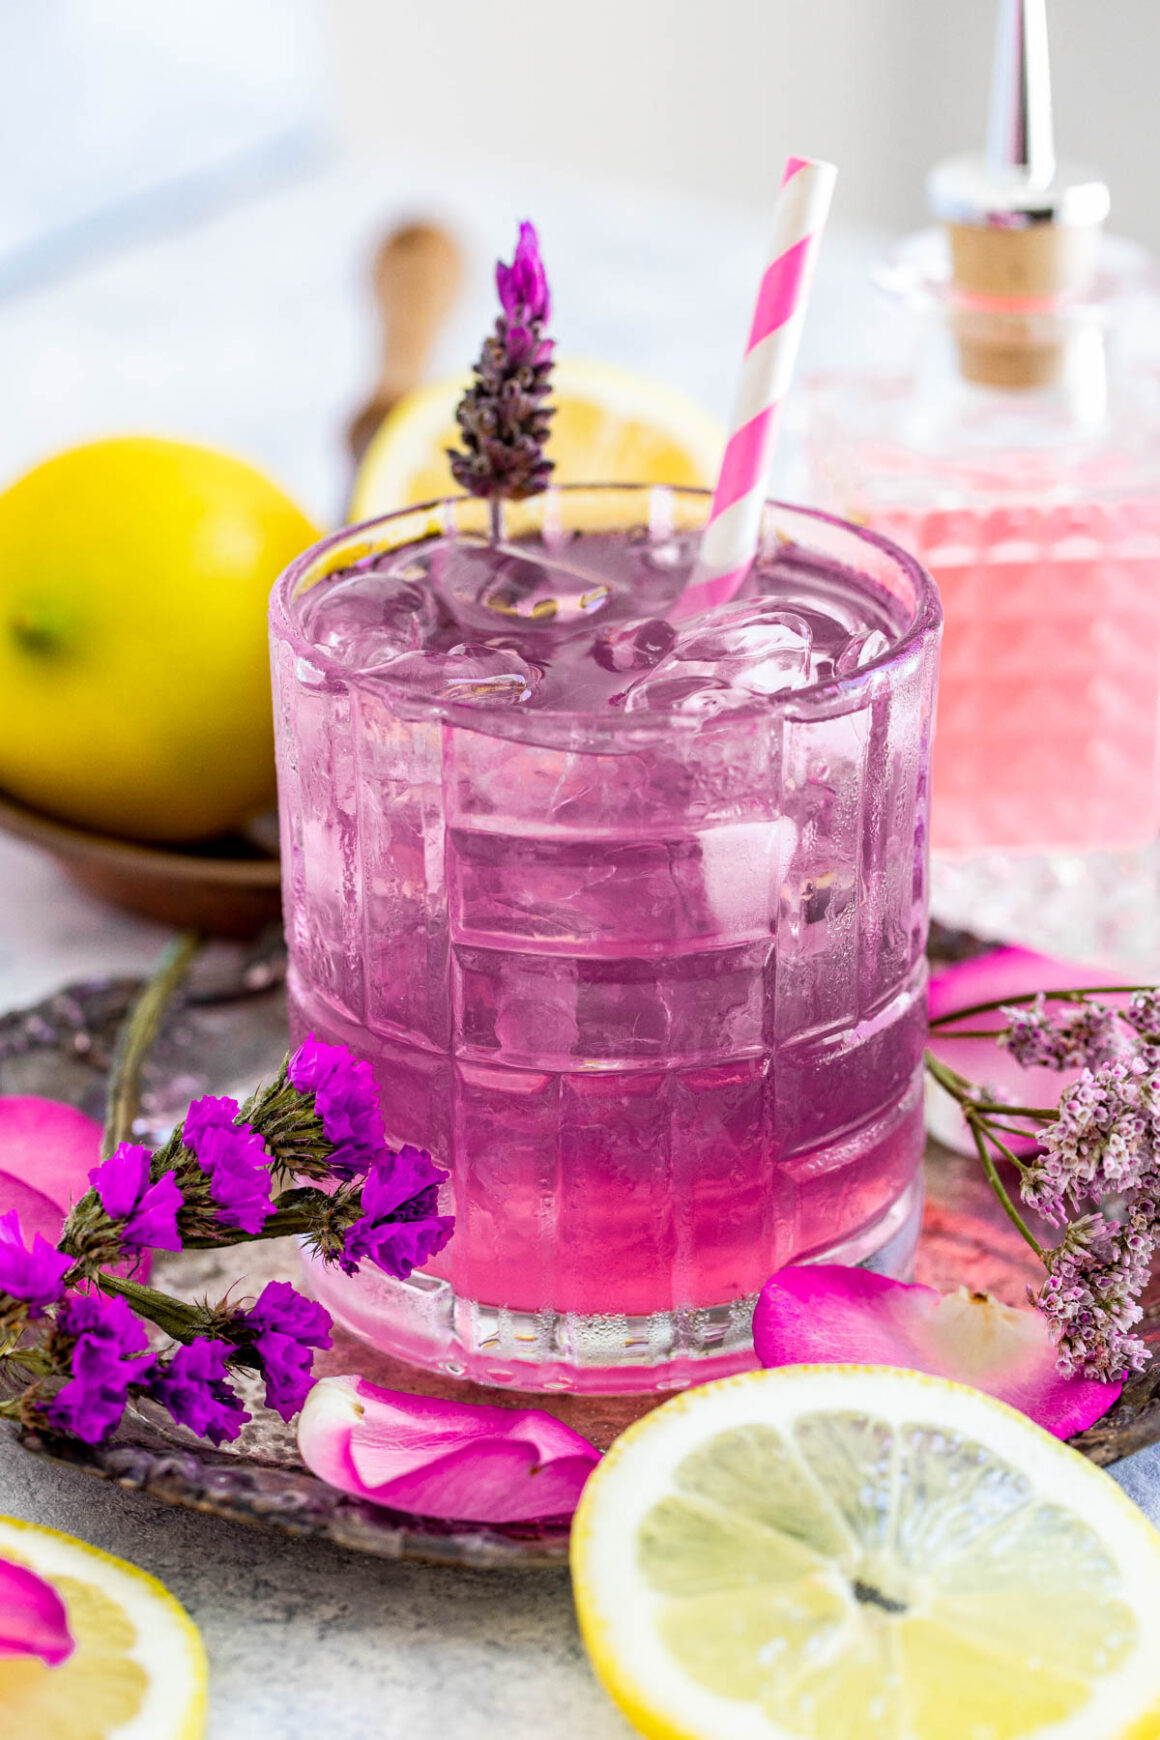 old fashioned glass of a lavender cocktail with a purple color serve with ice